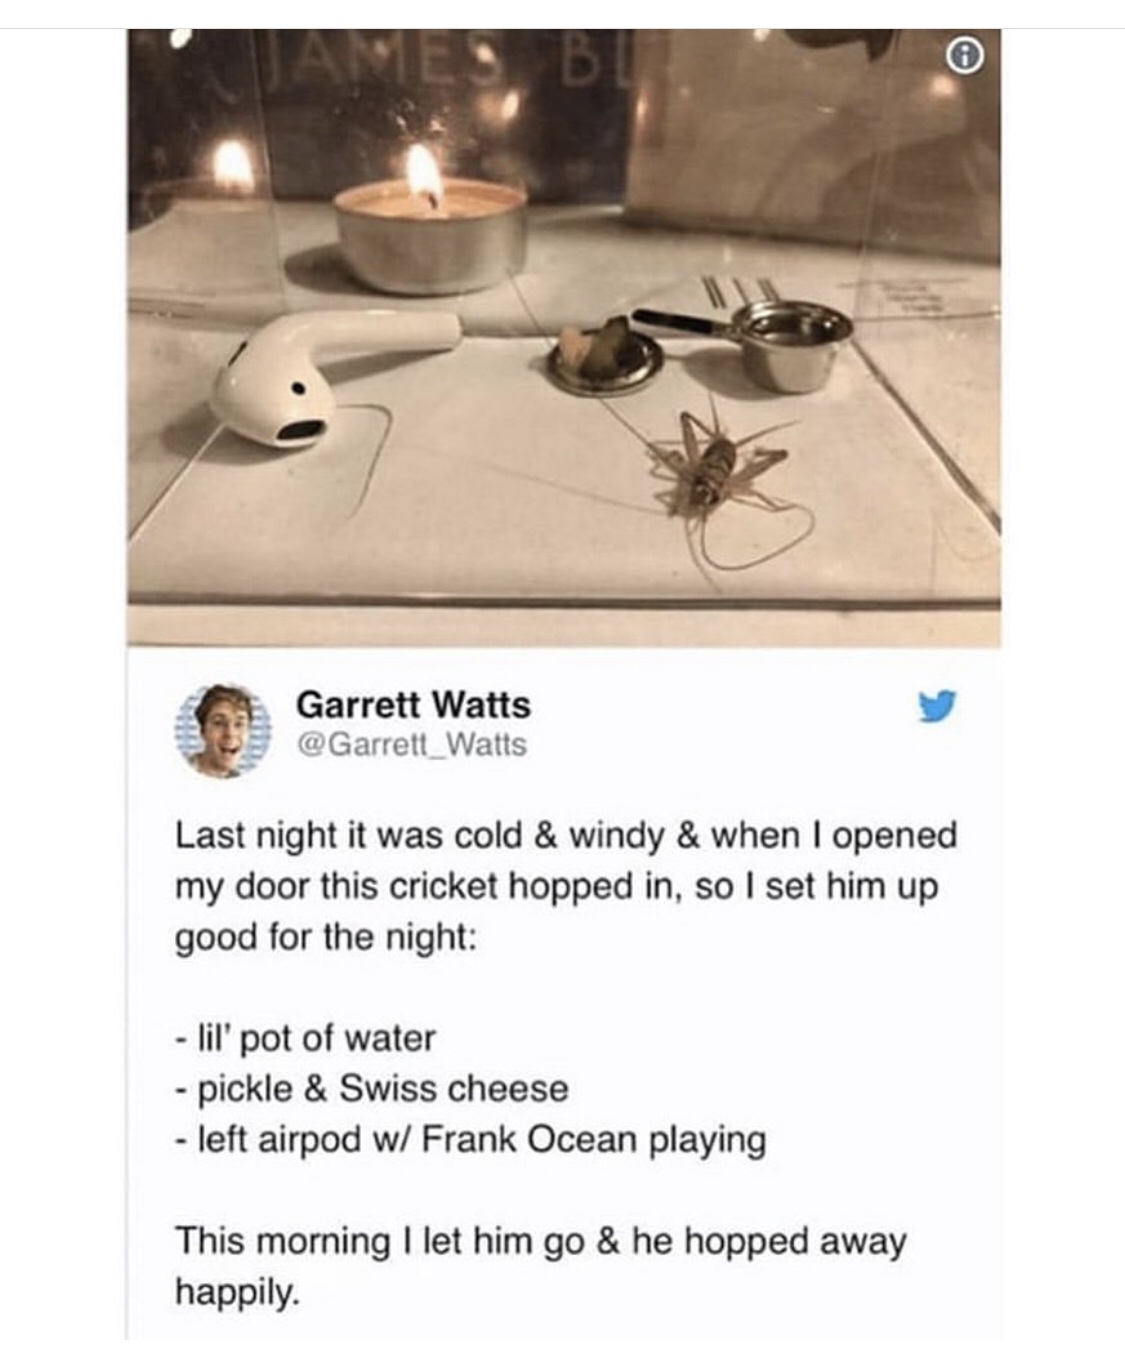 garrett watts quotes - Garrett Watts Last night it was cold & windy & when I opened my door this cricket hopped in, so I set him up good for the night lil' pot of water pickle & Swiss cheese left airpod w Frank Ocean playing This morning I let him go & he